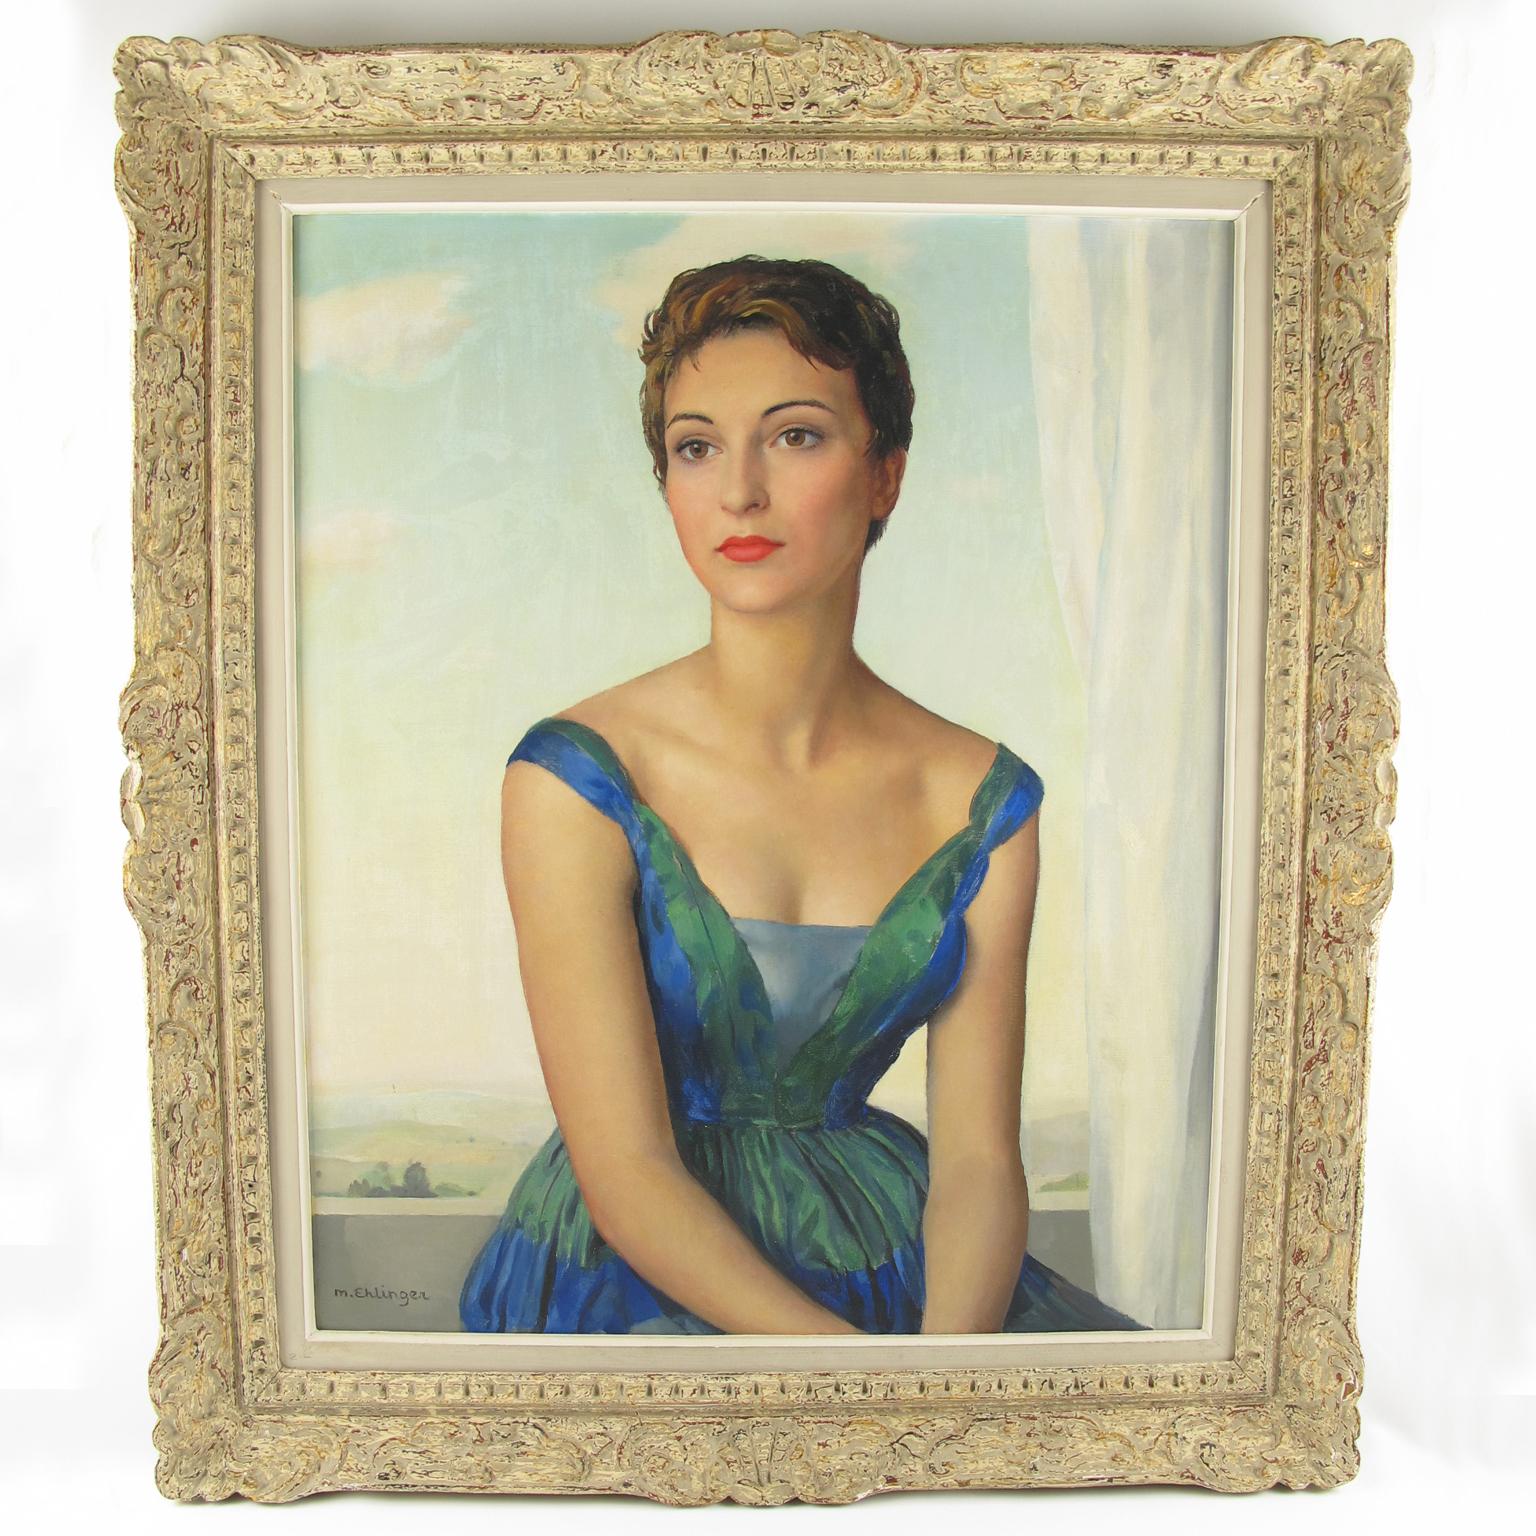 https://a.1stdibscdn.com/maurice-ambroise-ehlinger-paintings-parisian-socialite-young-woman-melle-france-noel-oil-on-canvas-painting-for-sale/a_12122/1556666135365/MAURICE_EHLINGER_PAINTING_P196_1_master.jpg